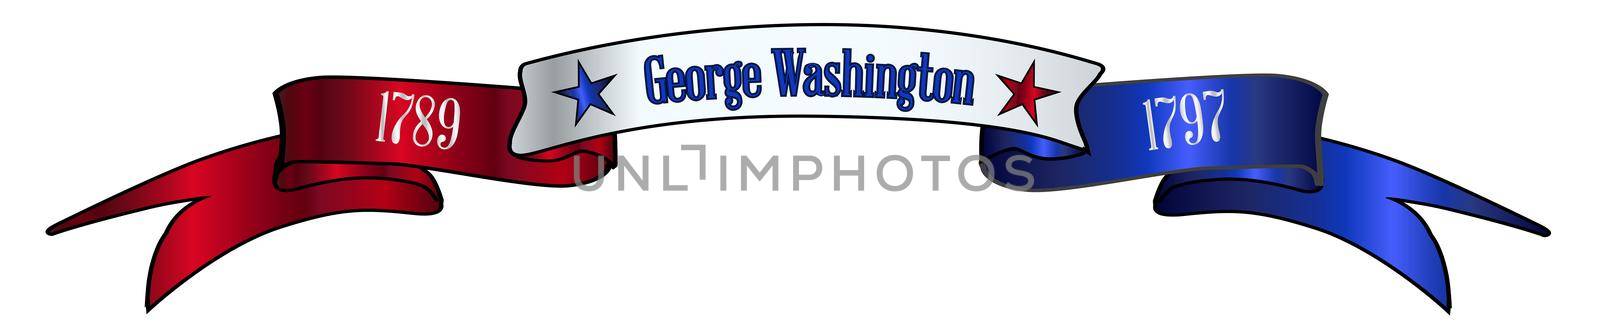 A red white and blue satin or silk ribbon banner with the text George Washington and stars